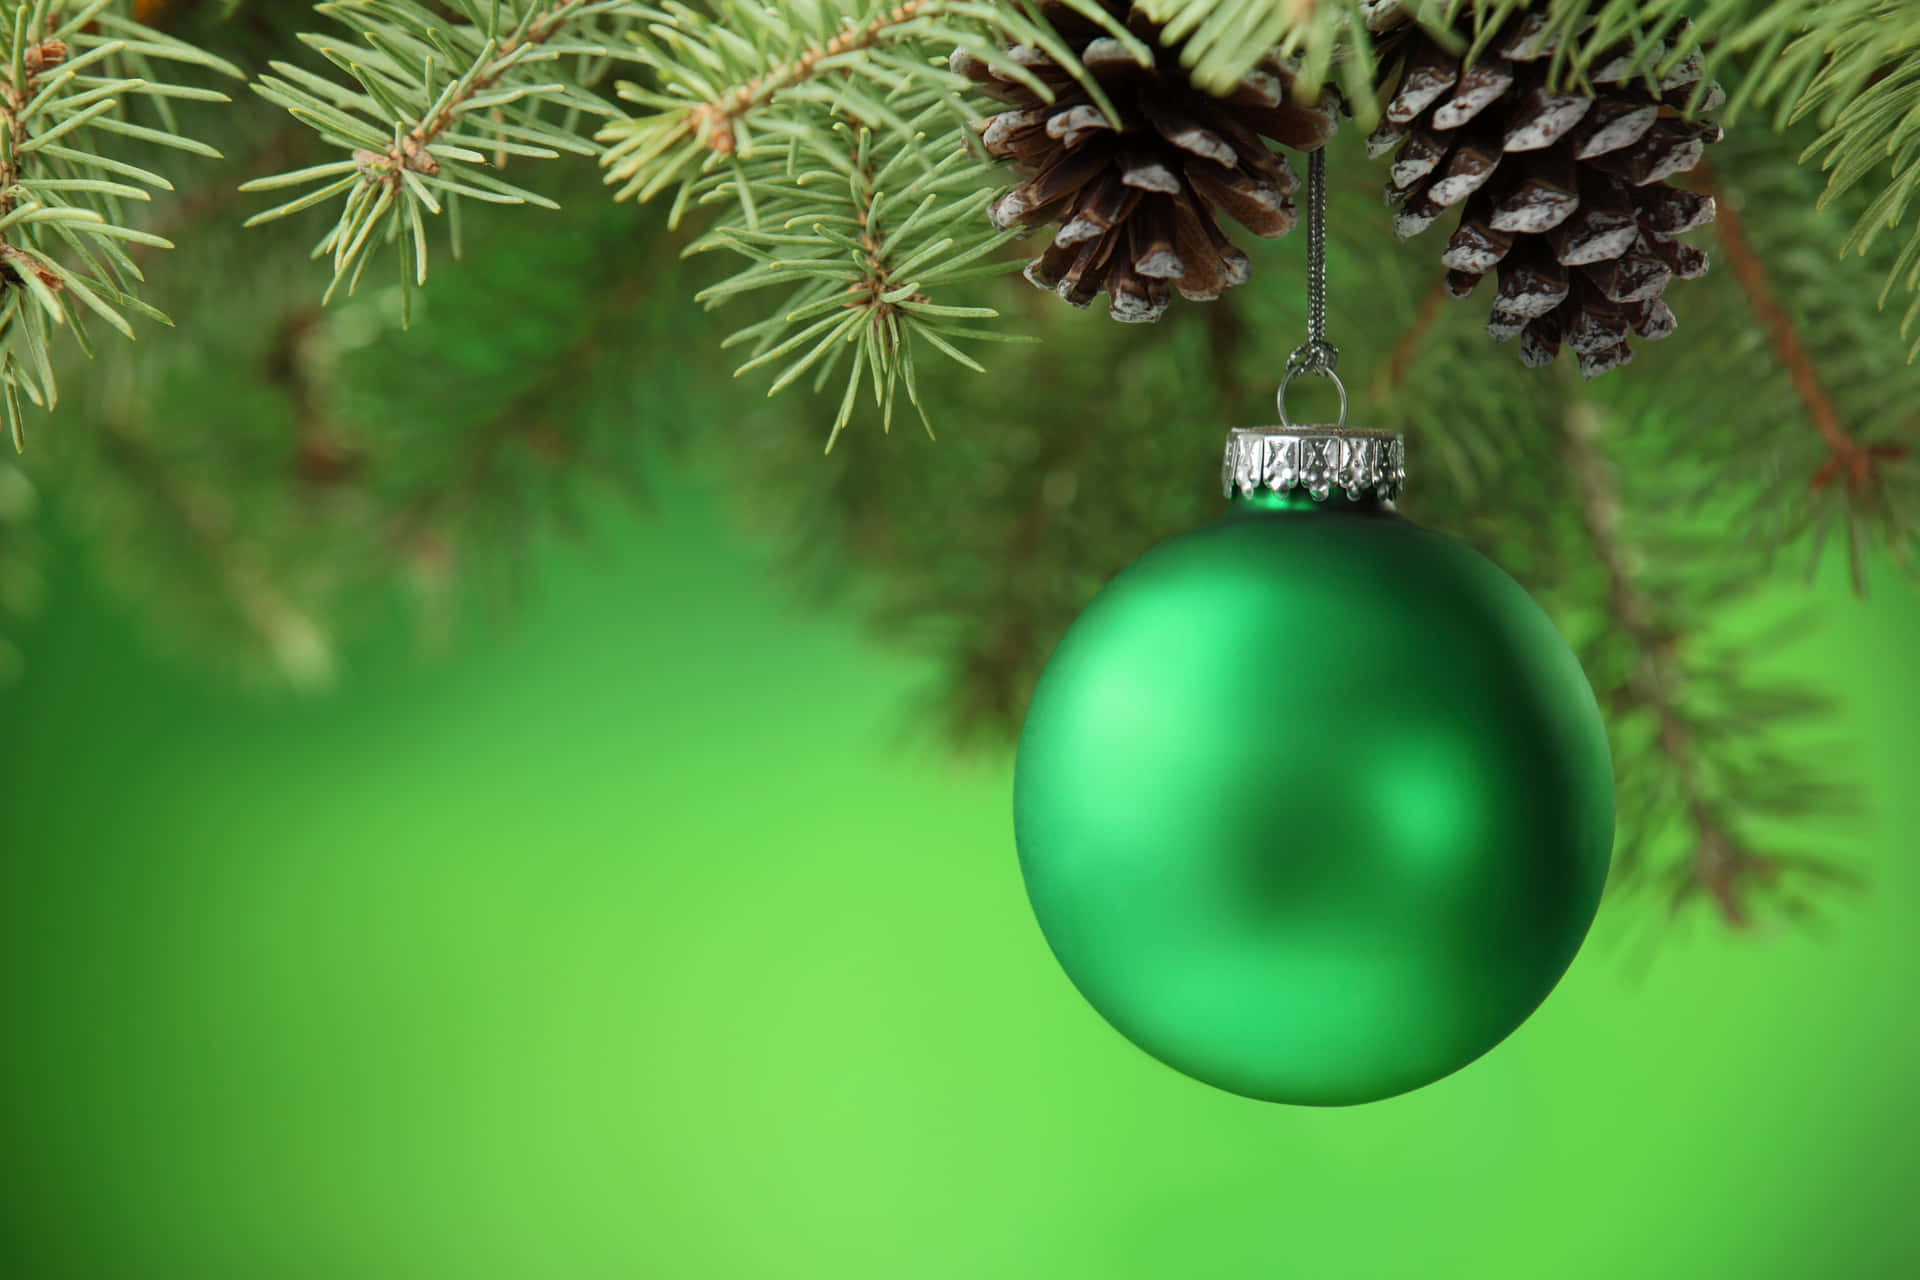 Celebrate another Green Christmas with family and friends